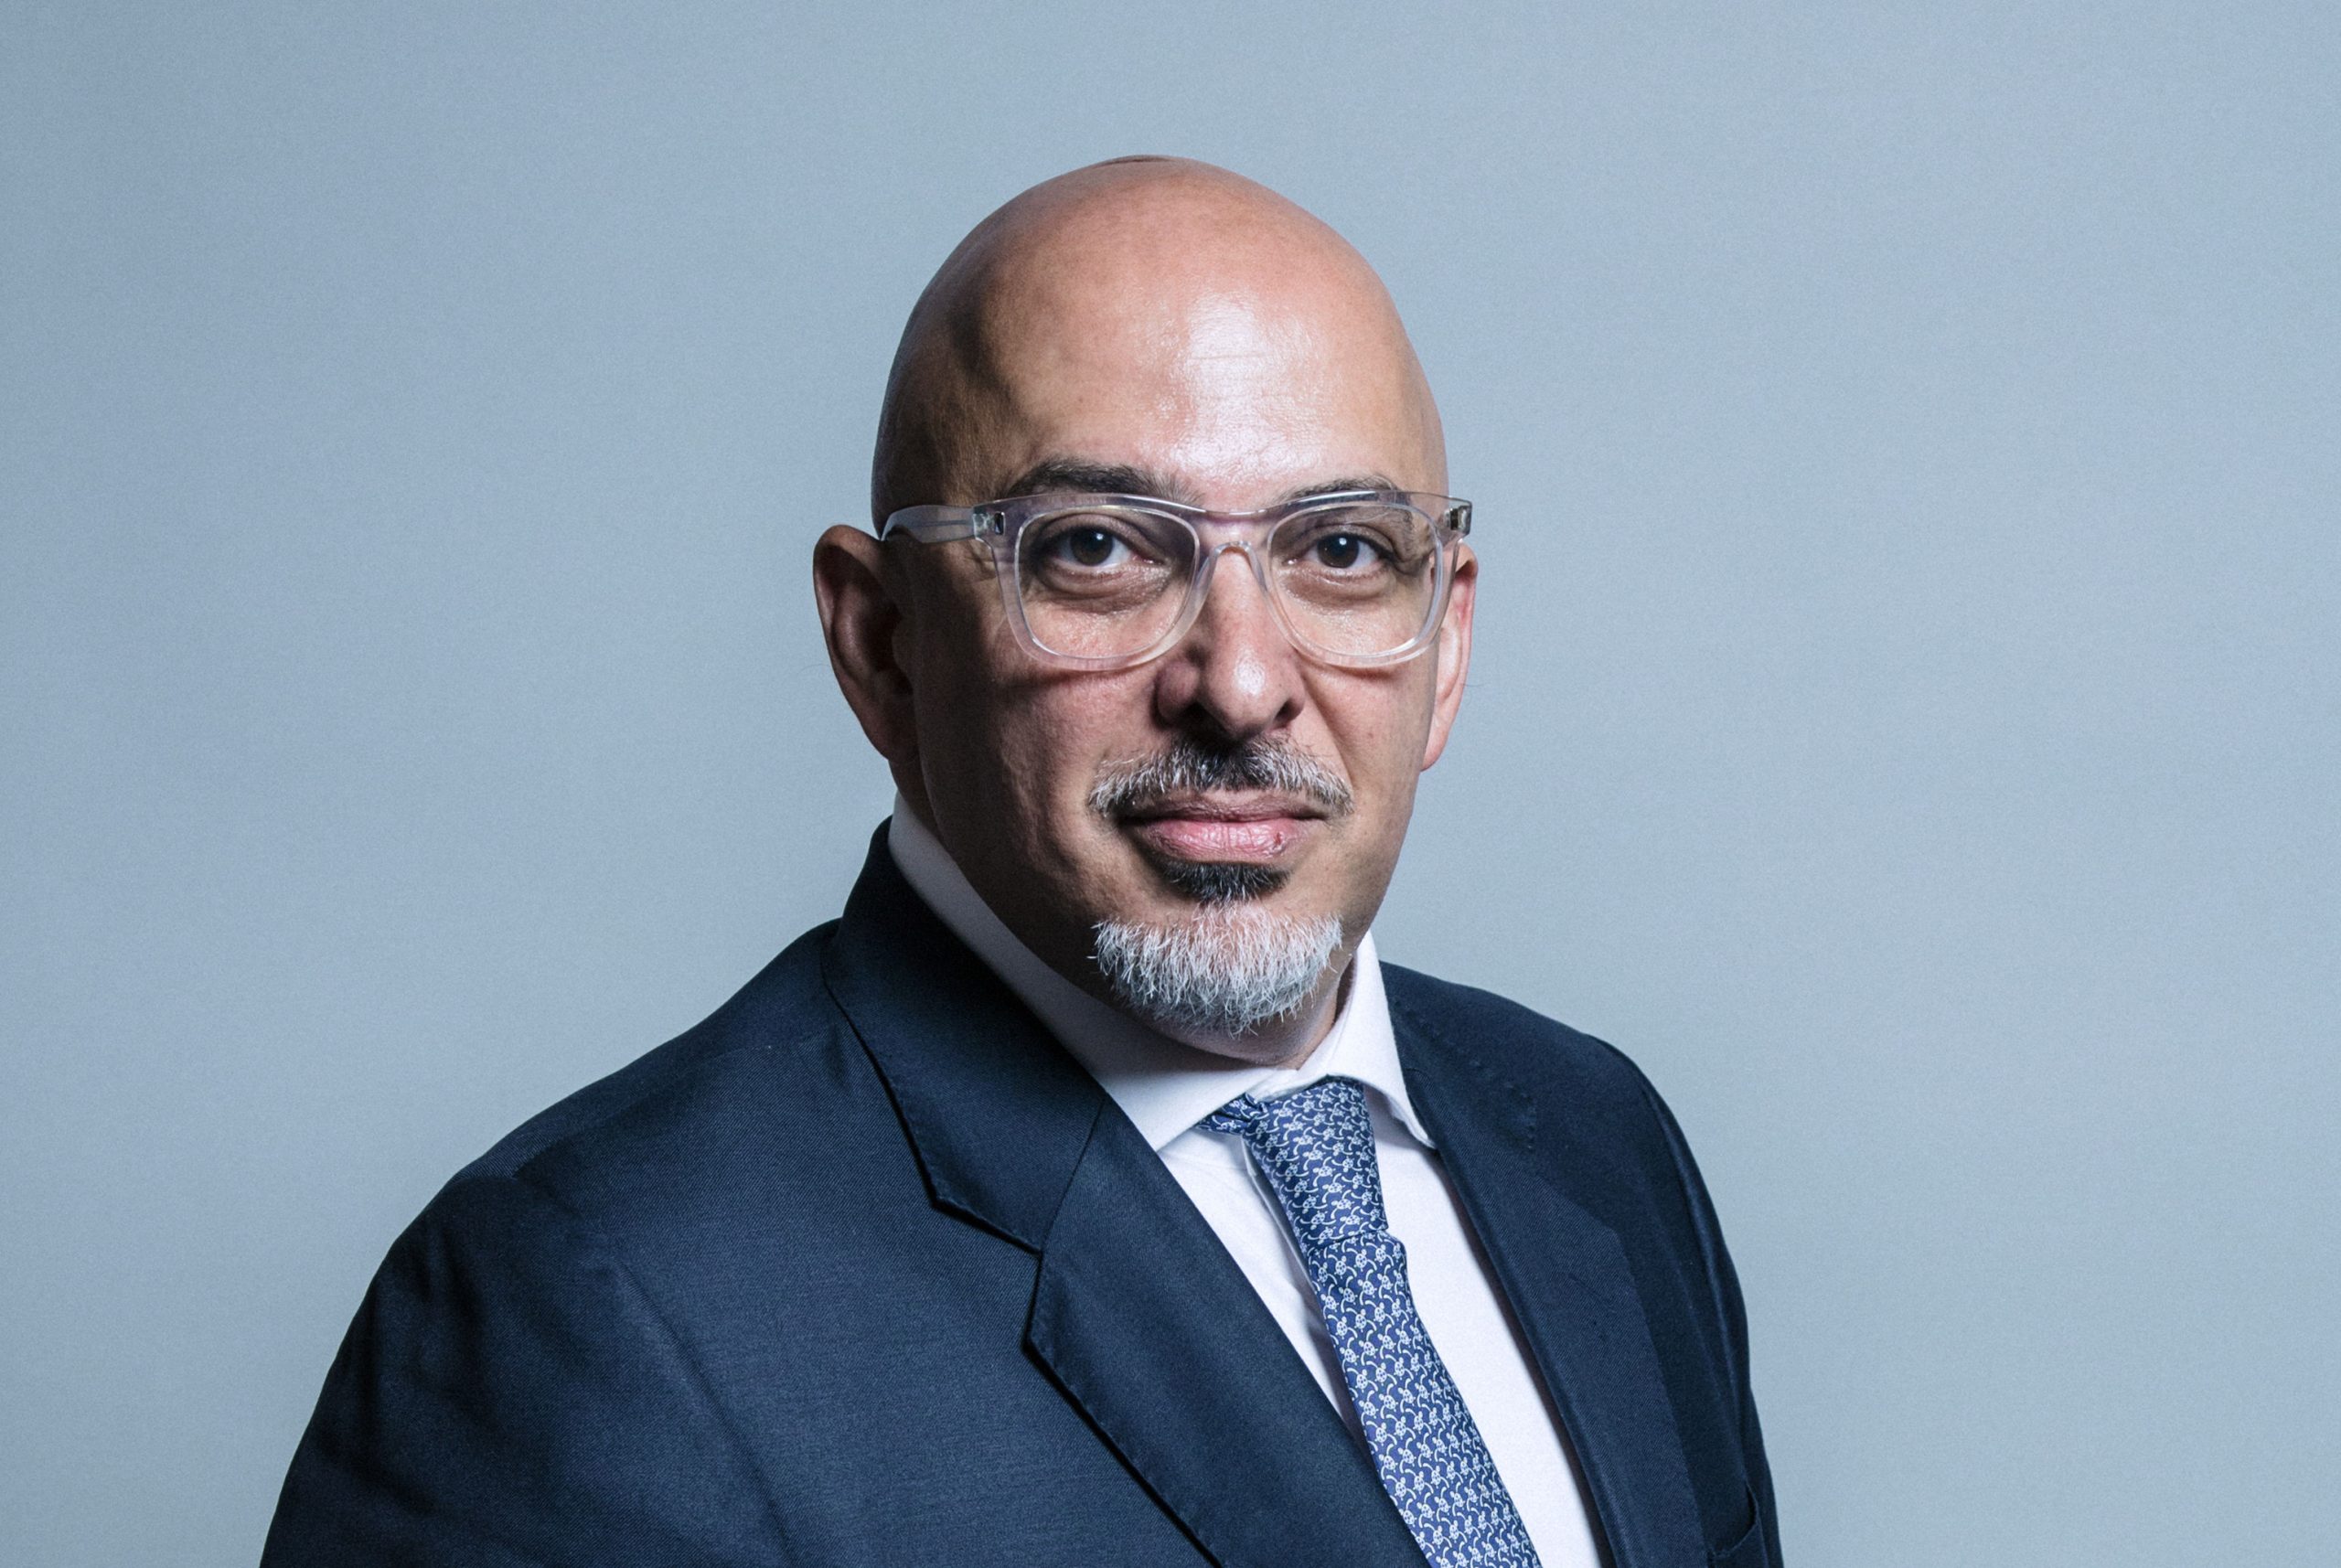 Official media portrait of Nadhim Zahawi a candidate in the tory leadership race